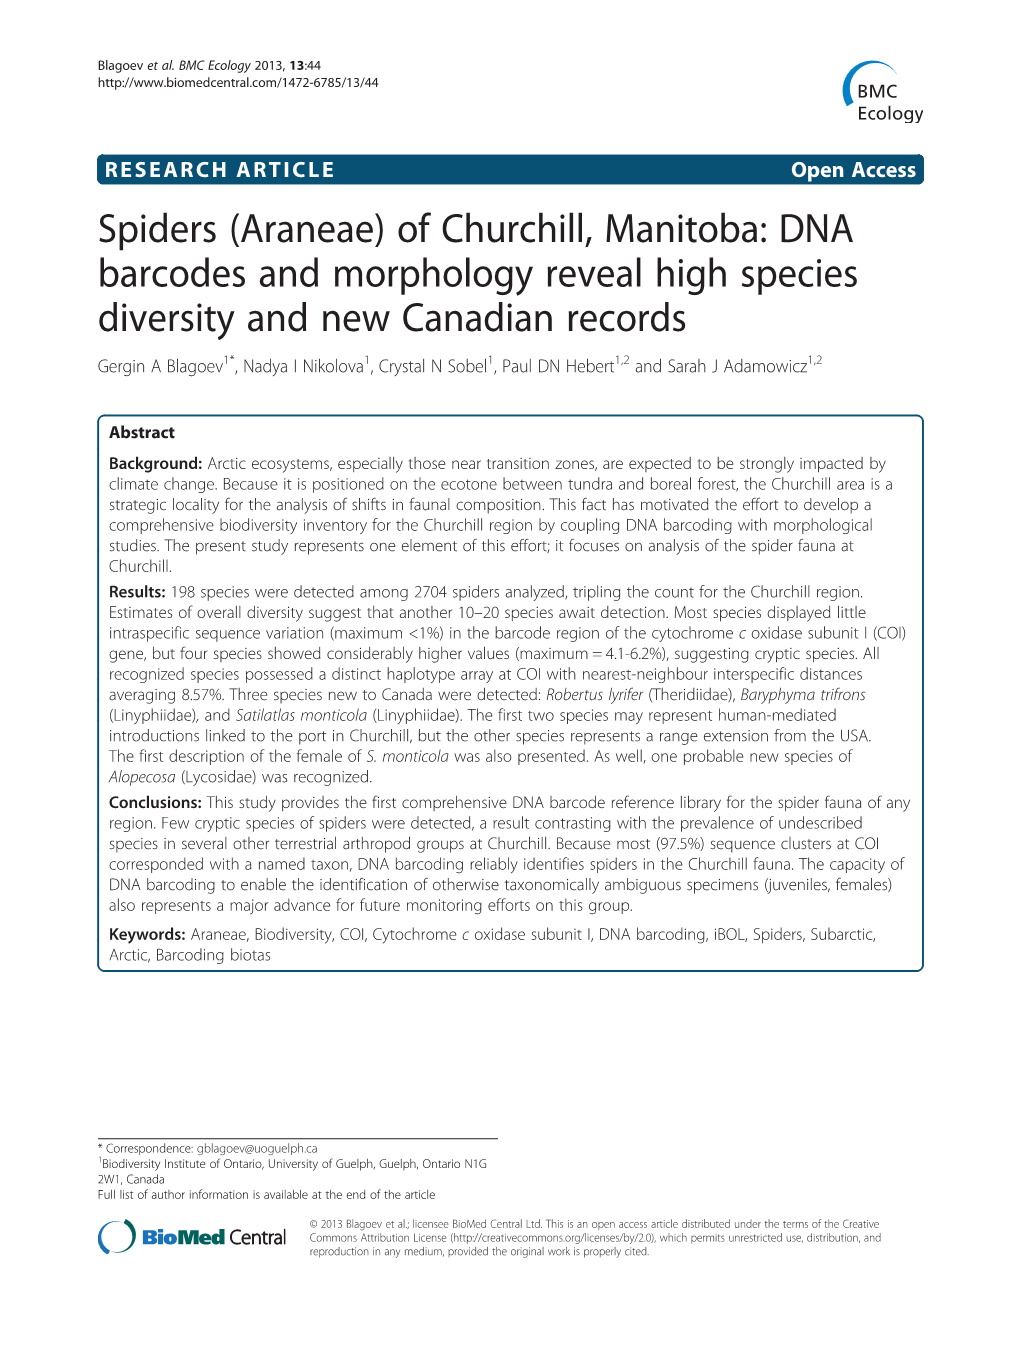 Spiders (Araneae) of Churchill, Manitoba: DNA Barcodes And